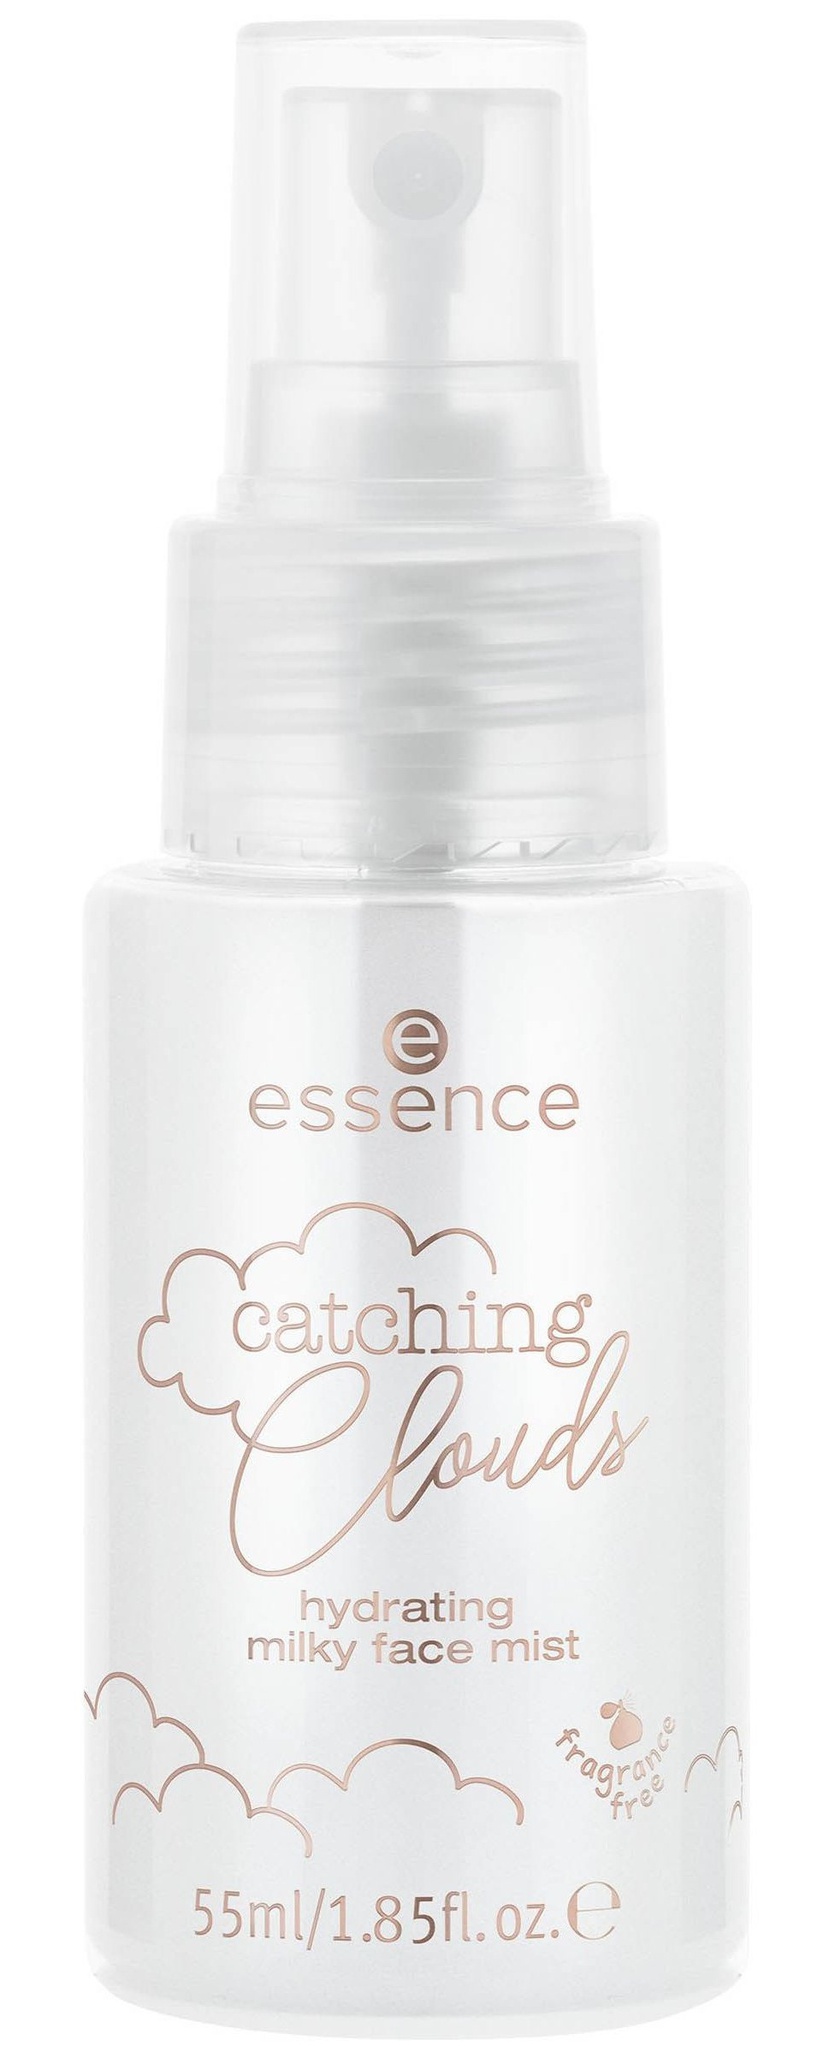 Essence Catching Clouds Hydrating Milky Face Mist